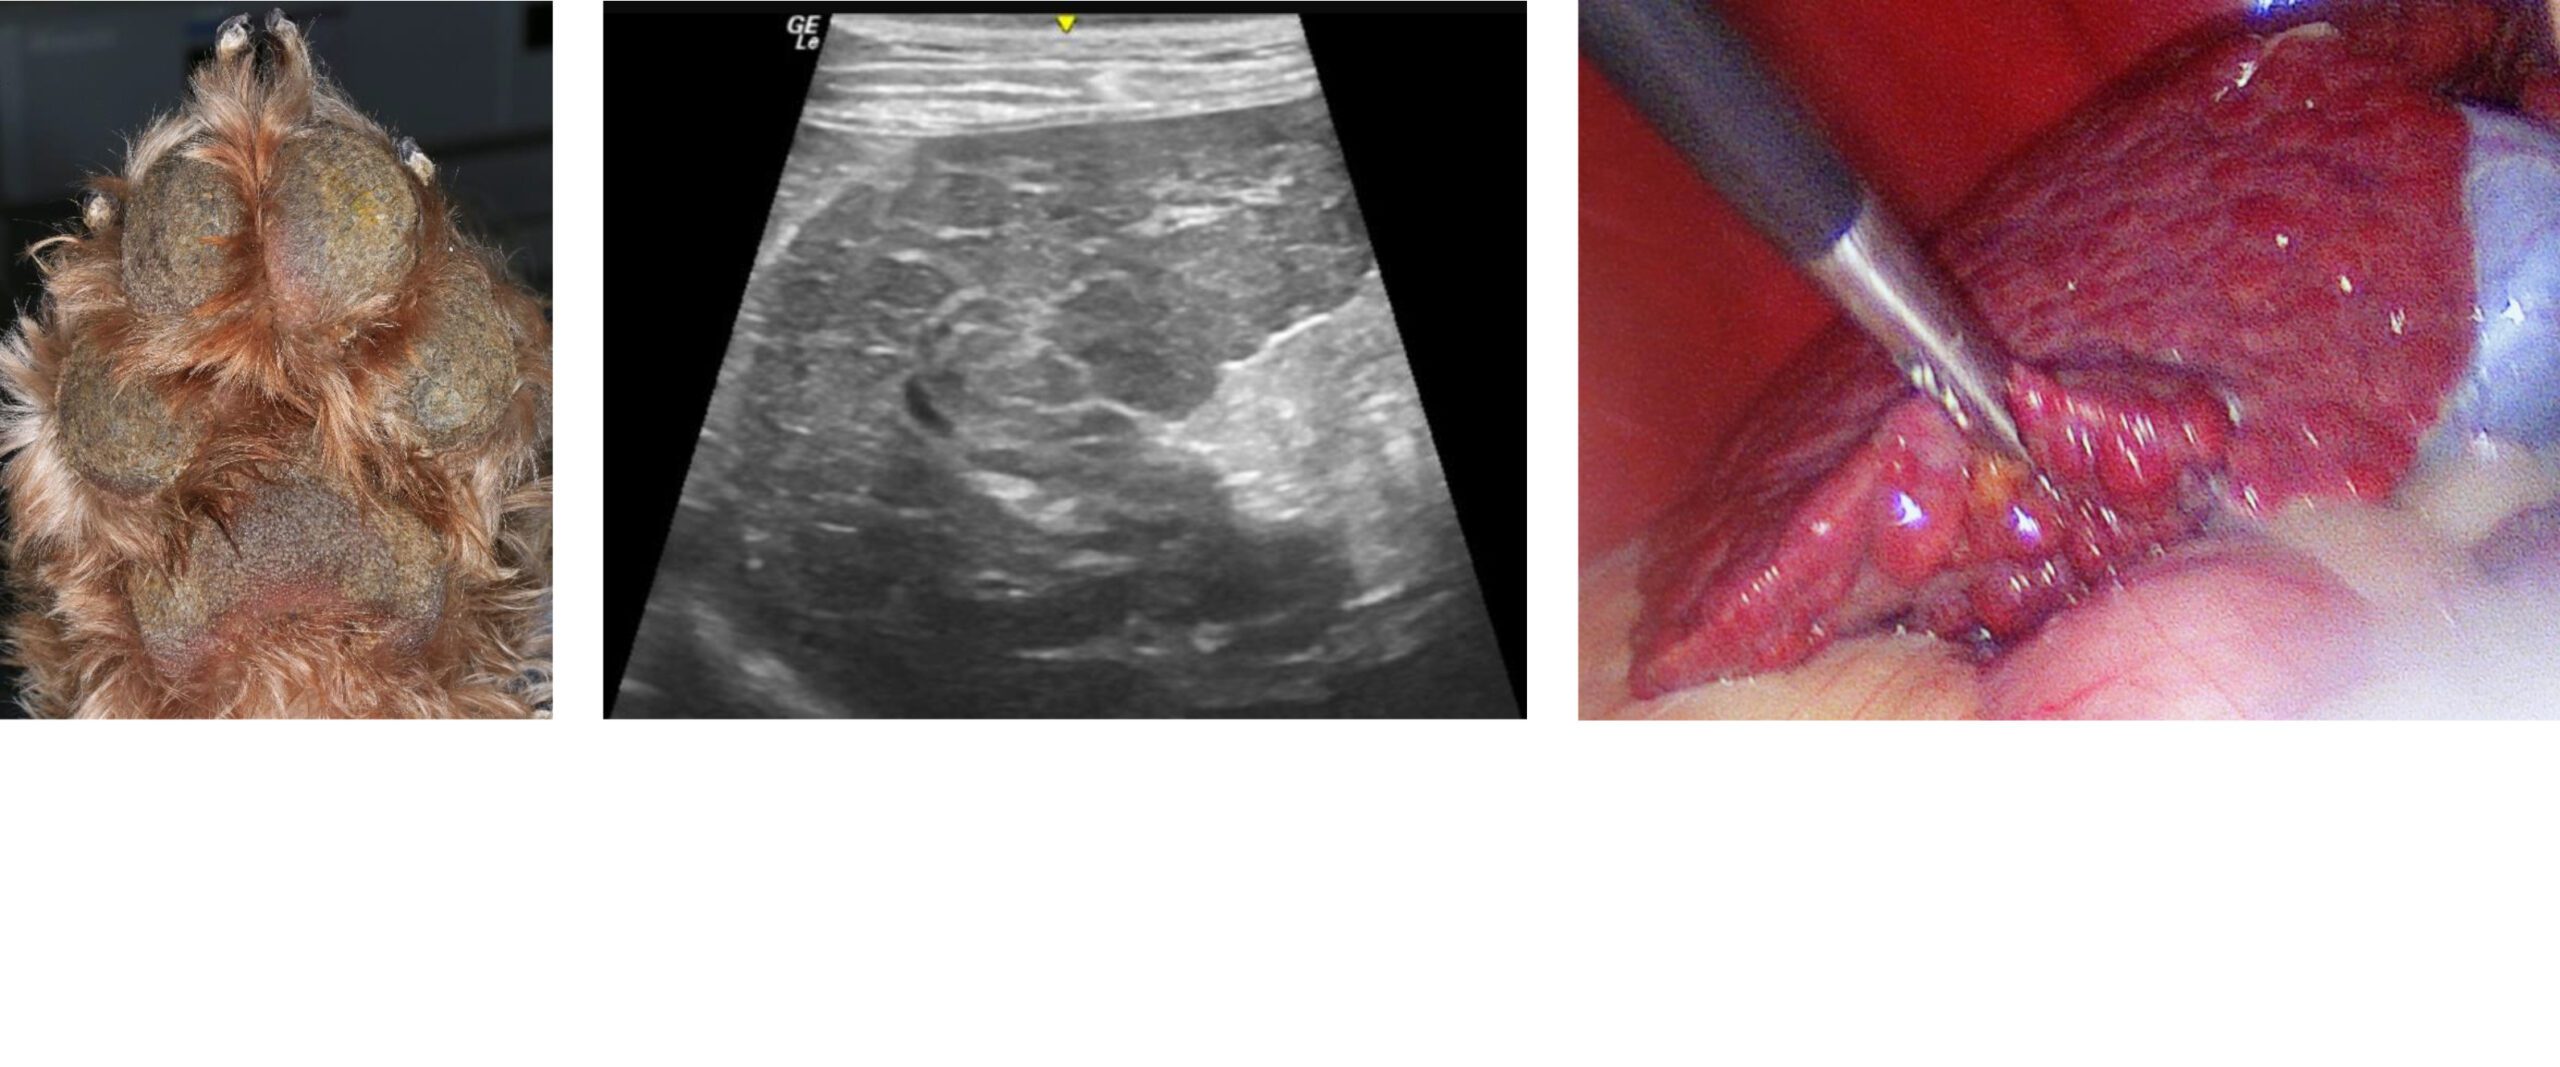 Canine Hepatocutaneous Syndrome - Hyperkeratotic Pads, Hepatic Ultrasonography, Laparoscopic Liver Biopsy